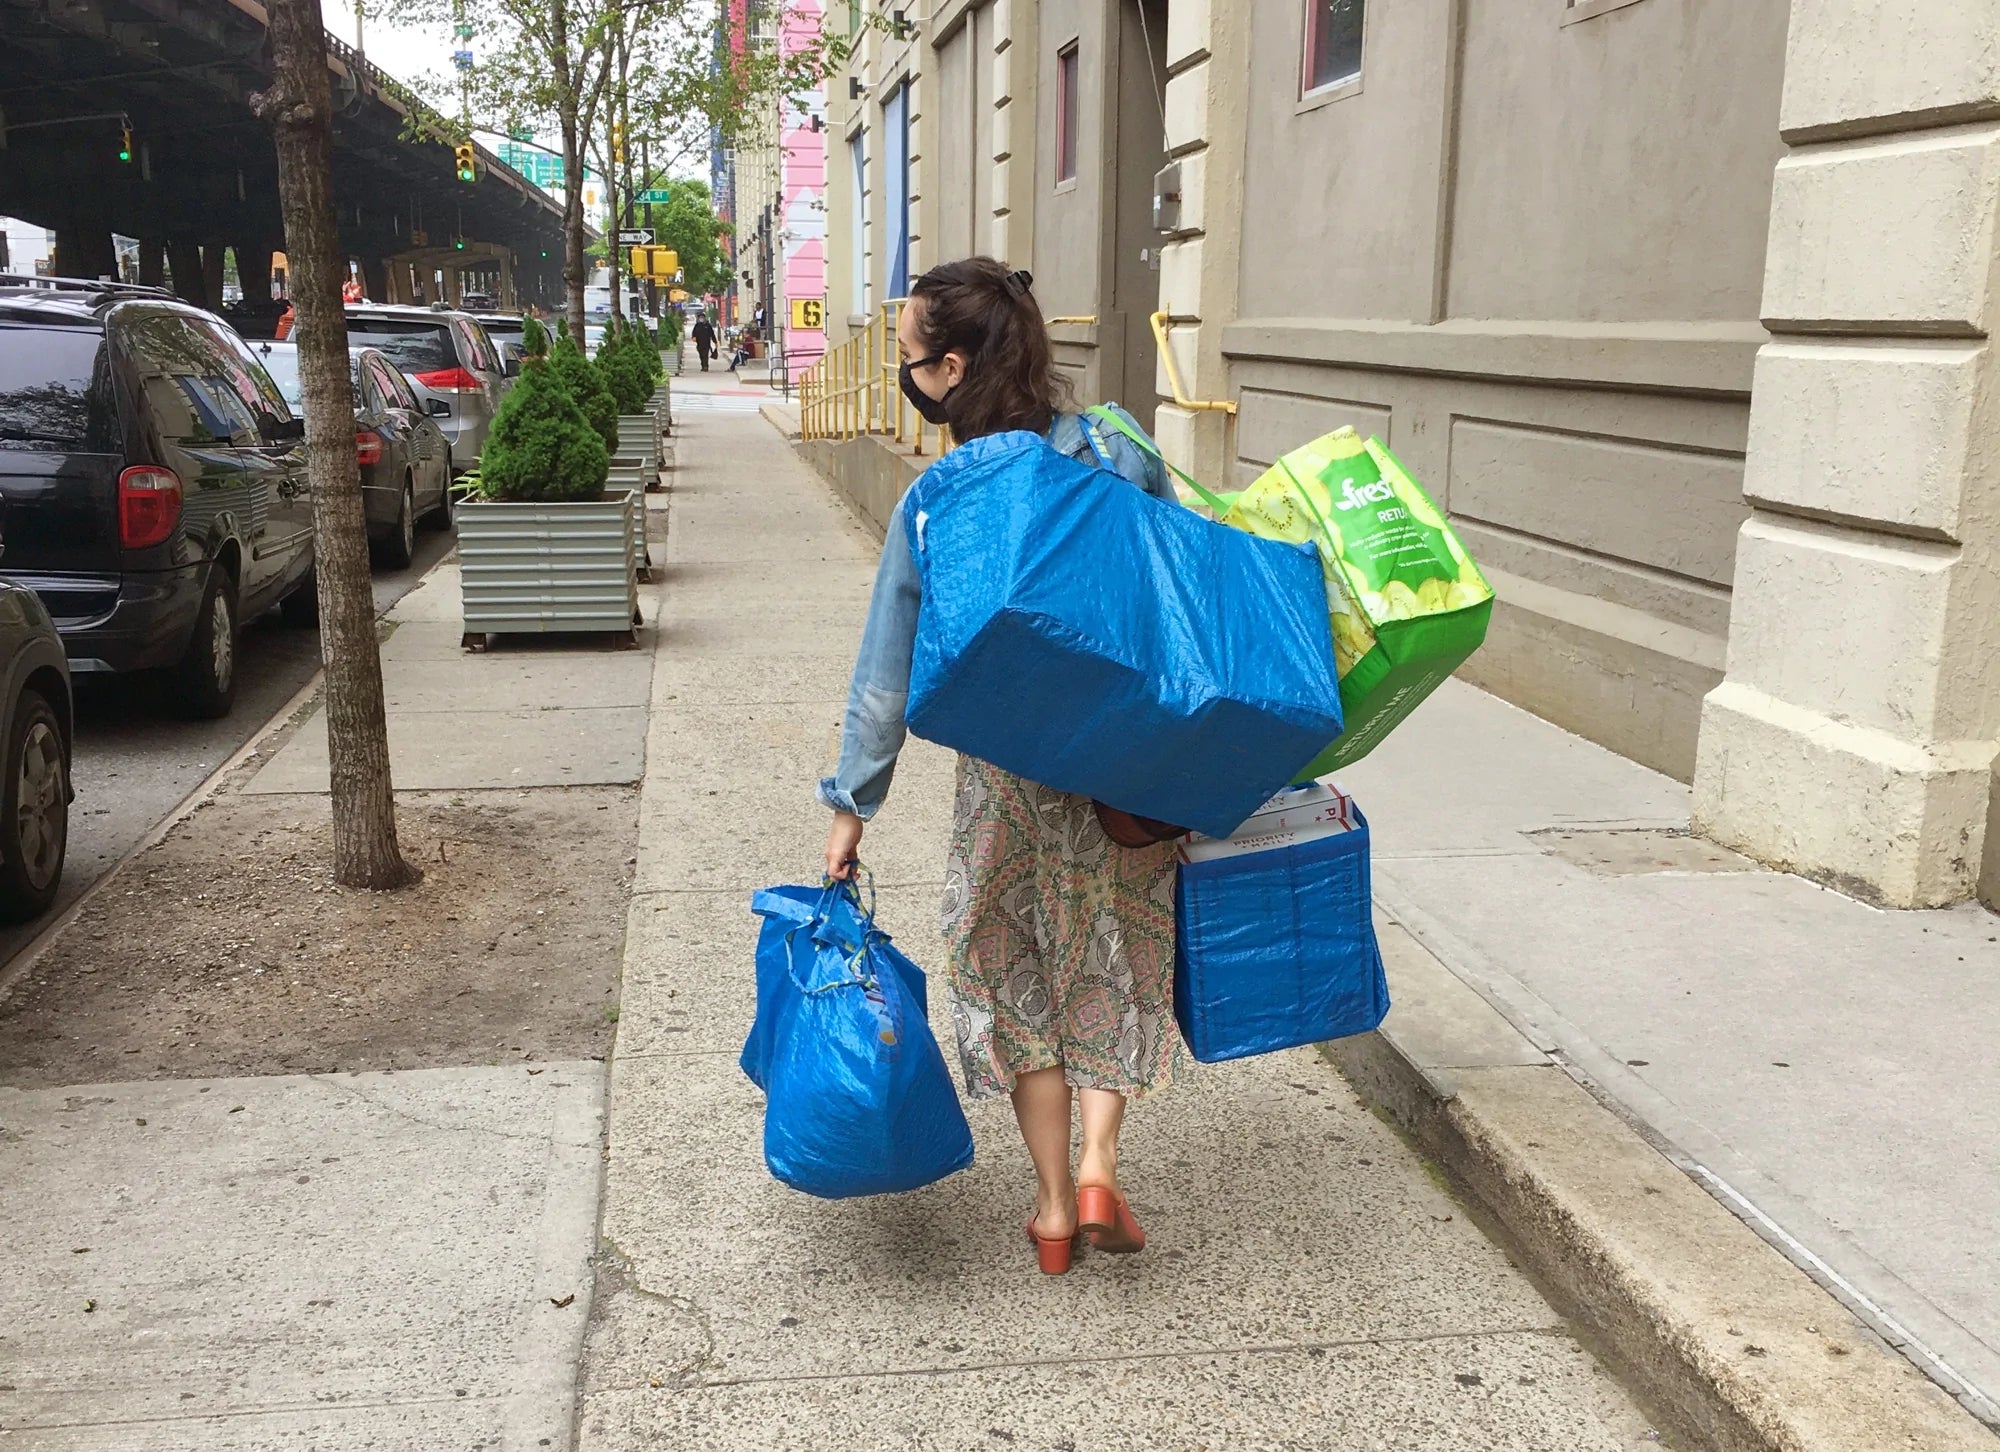 A business owner walks along the street carrying IKEA bags full of vintage clothing